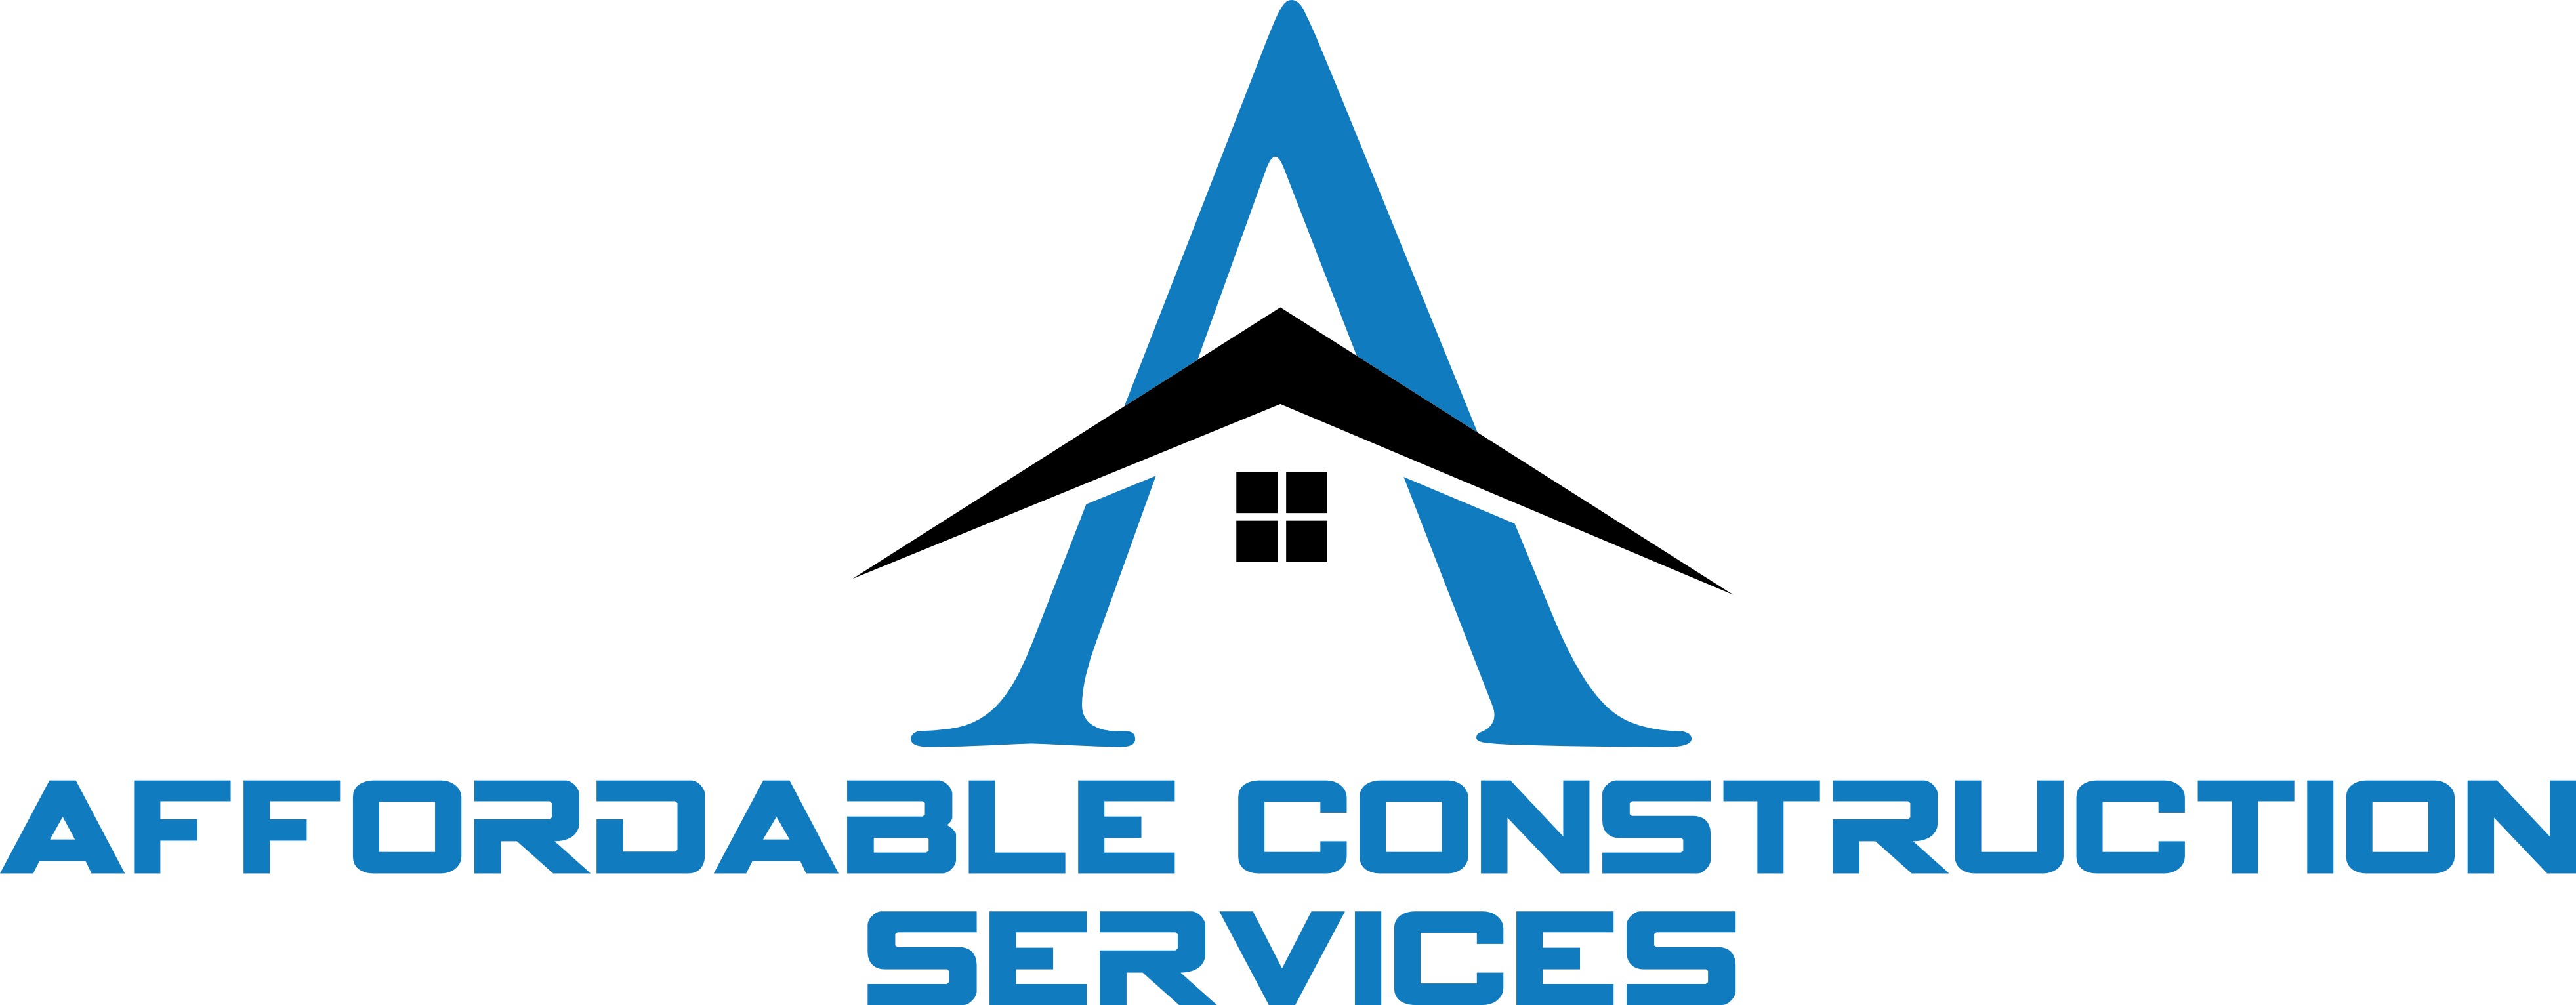 Affordable Construction Services Logo